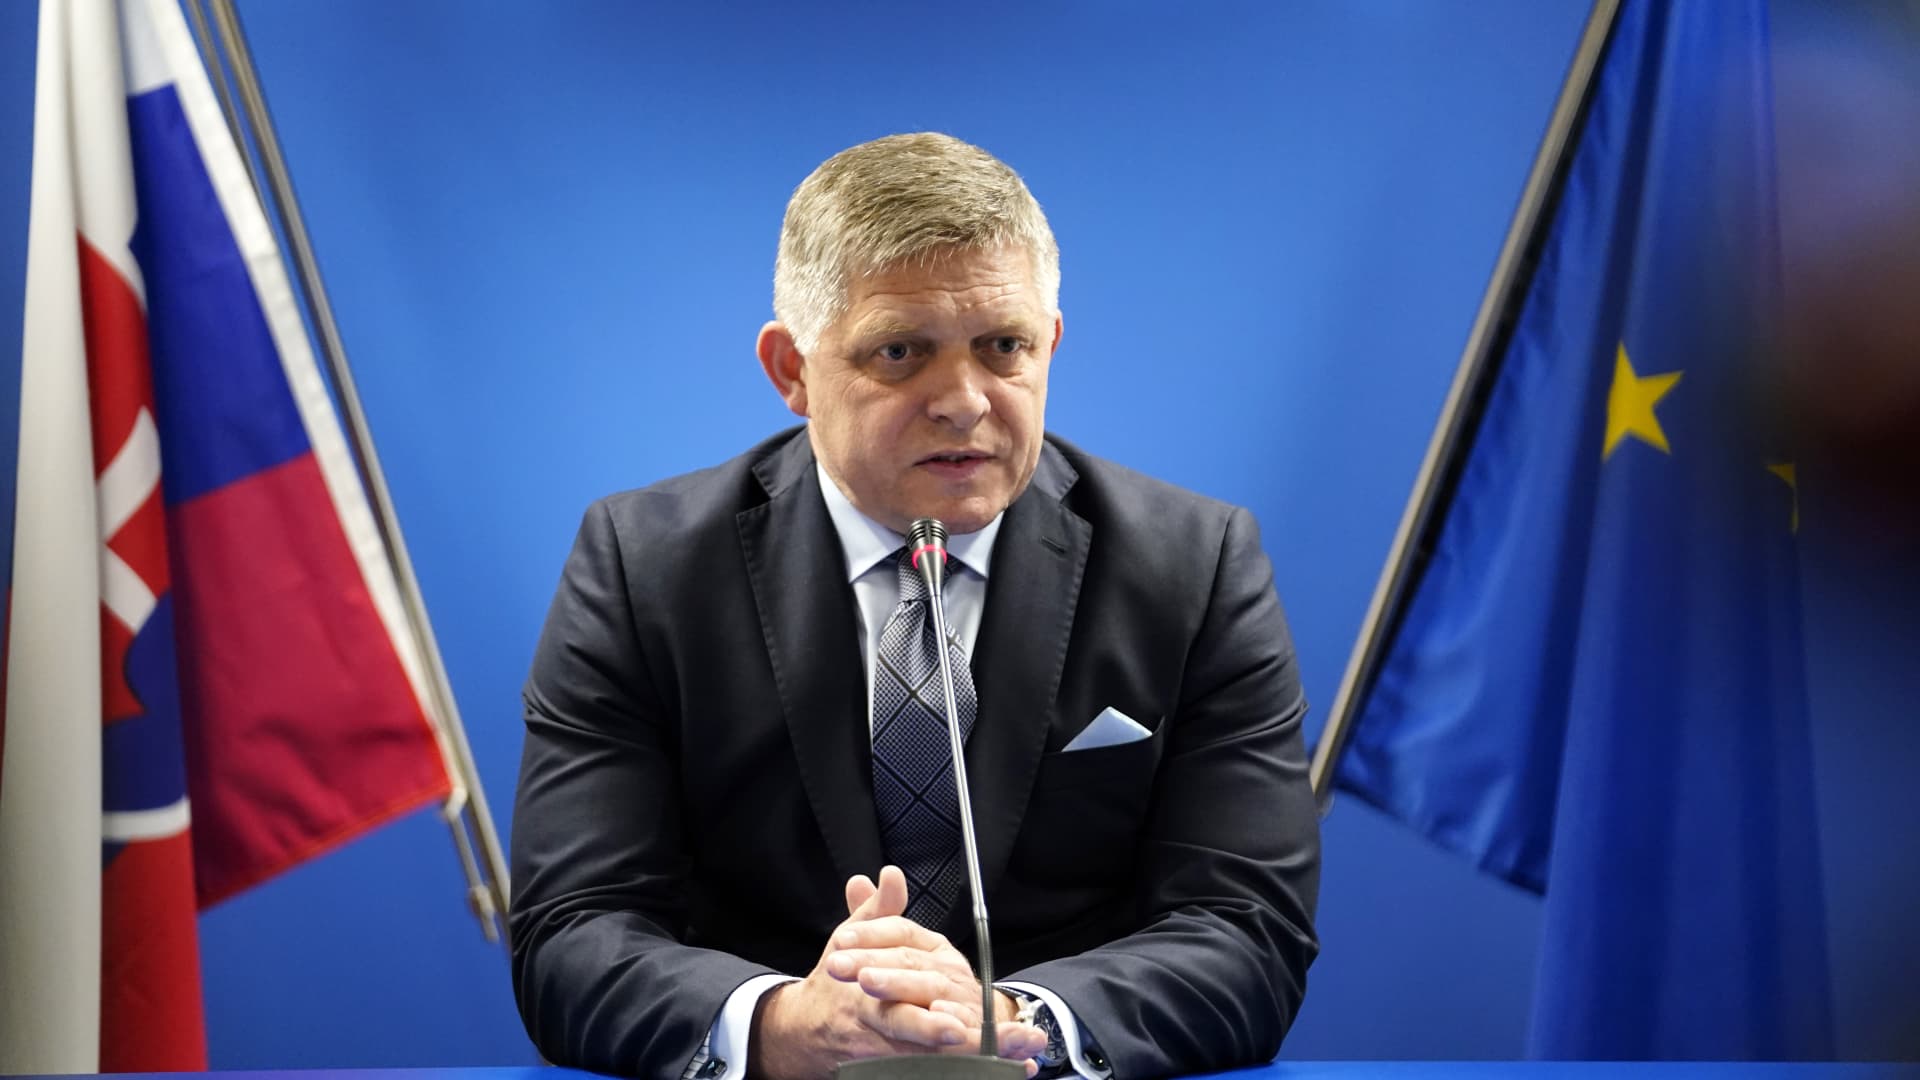 Slovak Prime Minister Fico was shot and is in a 'life-threatening' condition